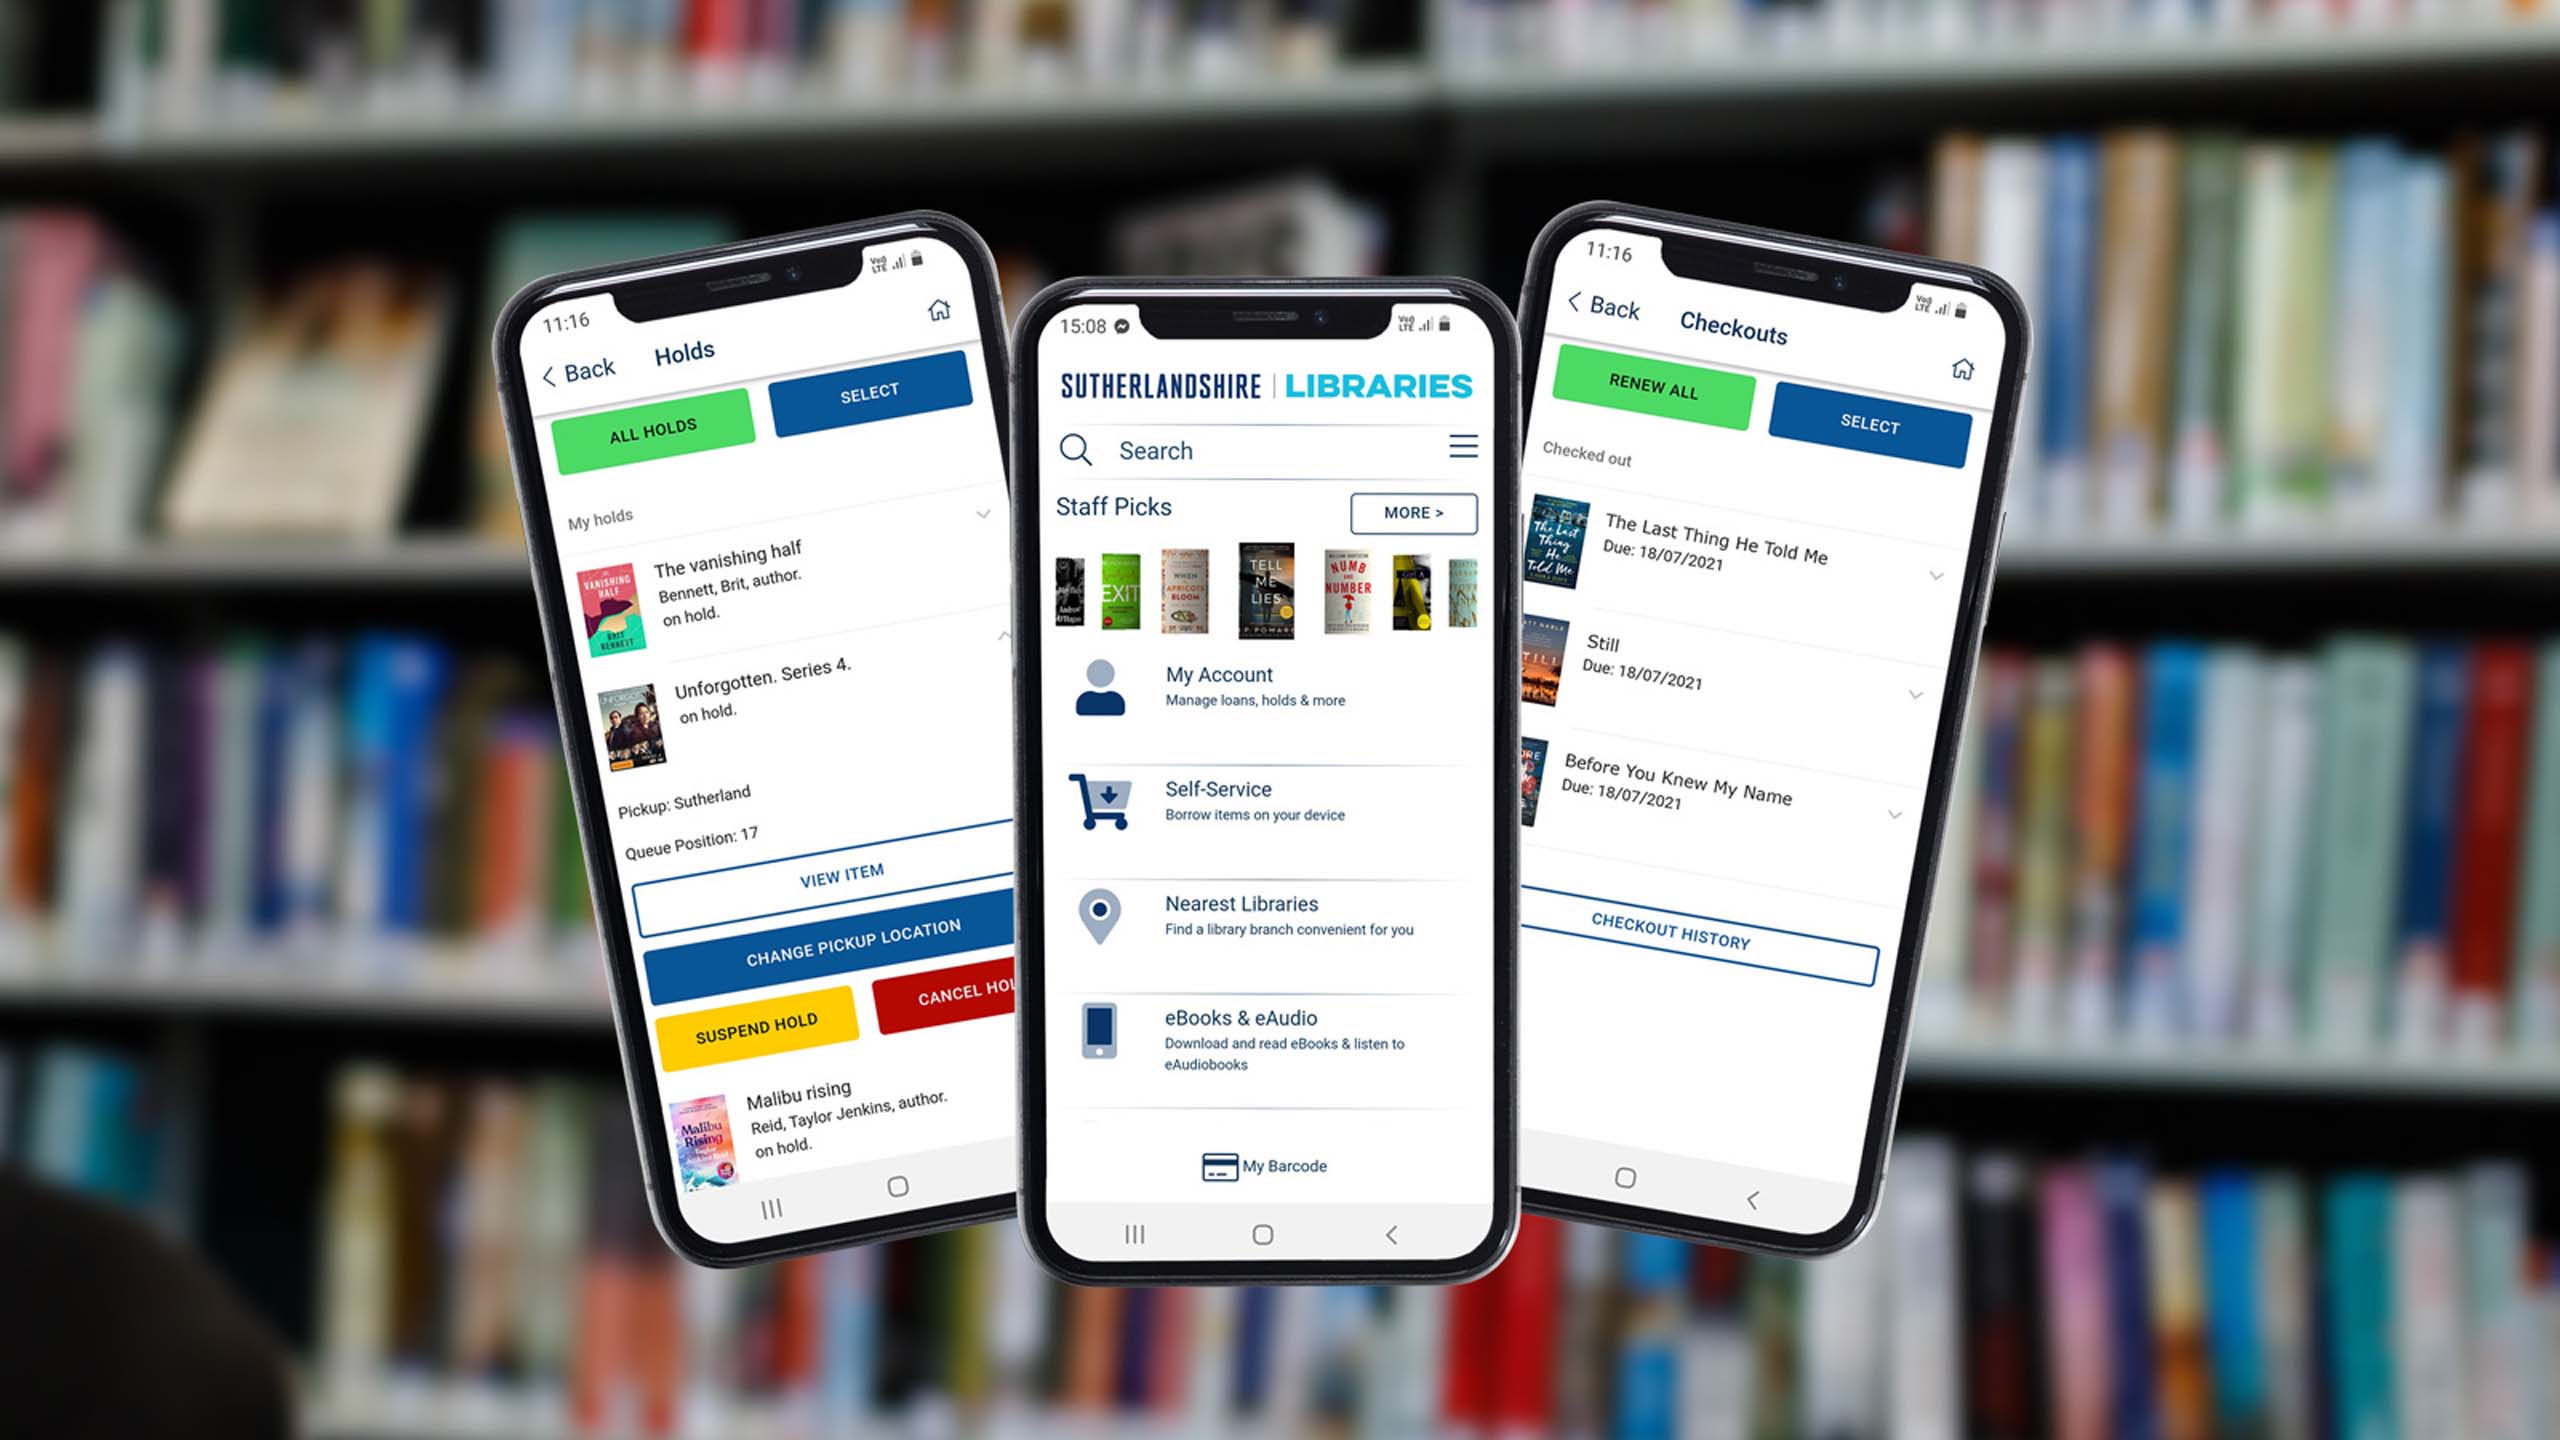 3 phones showing the Sutherland Shire Libraries app